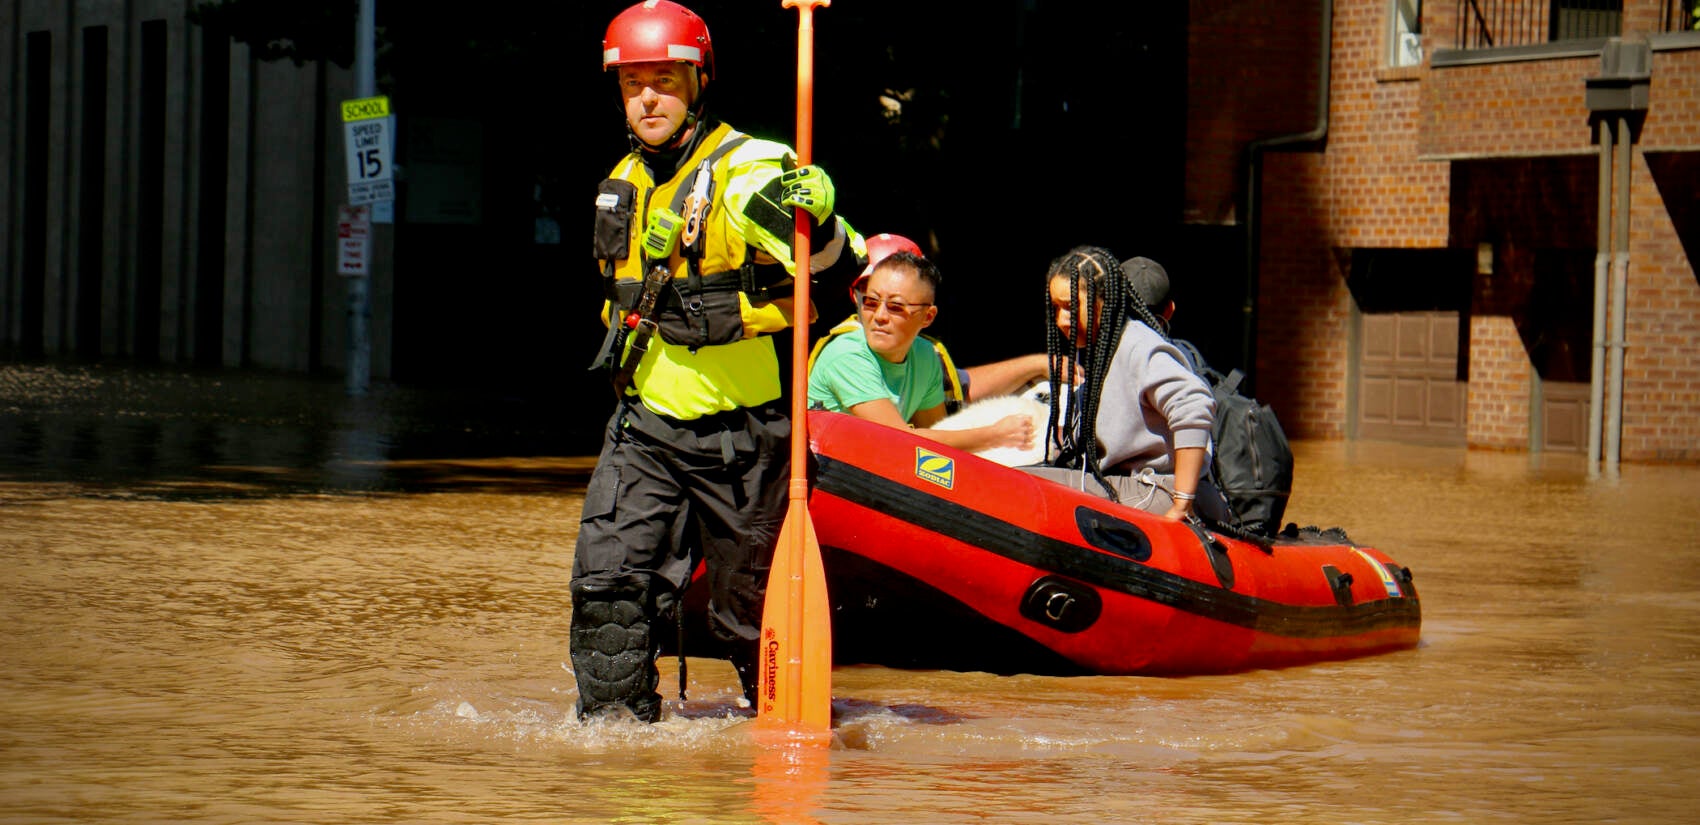 Philadelphia Fire Department personnel carry residents of the Riverwalk apartments to safety at 22nd and Arch streets after they were trapped by flood waters